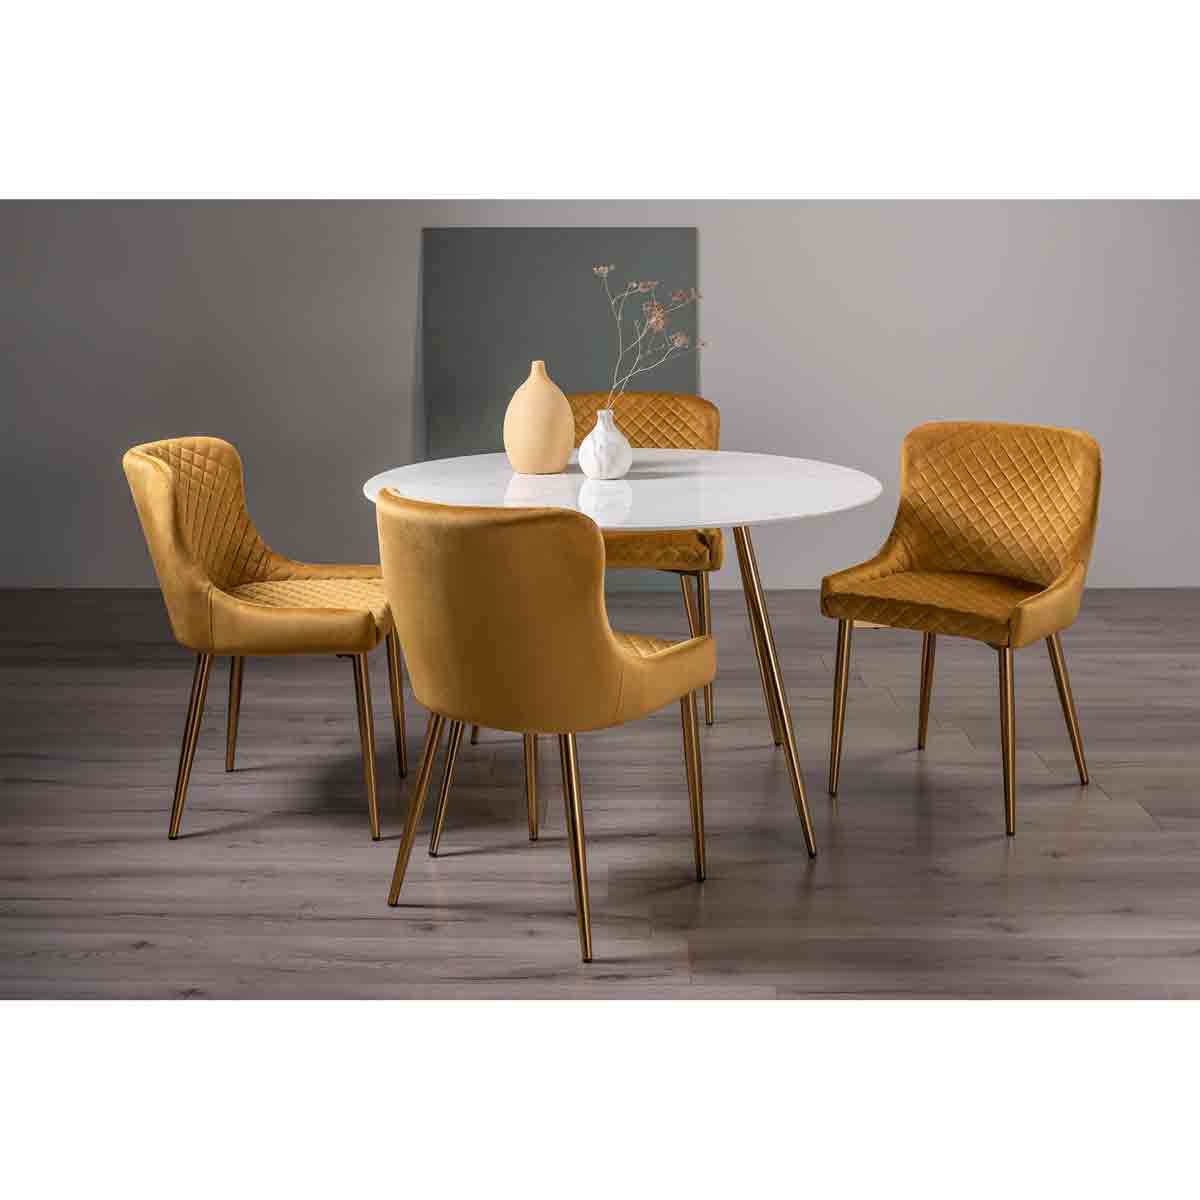 Bentley Designs Frances White Marble Effect Tempered Glass 4 Seater Dining Table & 4 Cezanne Mustard Velvet Fabric Chairs With Matt Gold Plated Legs